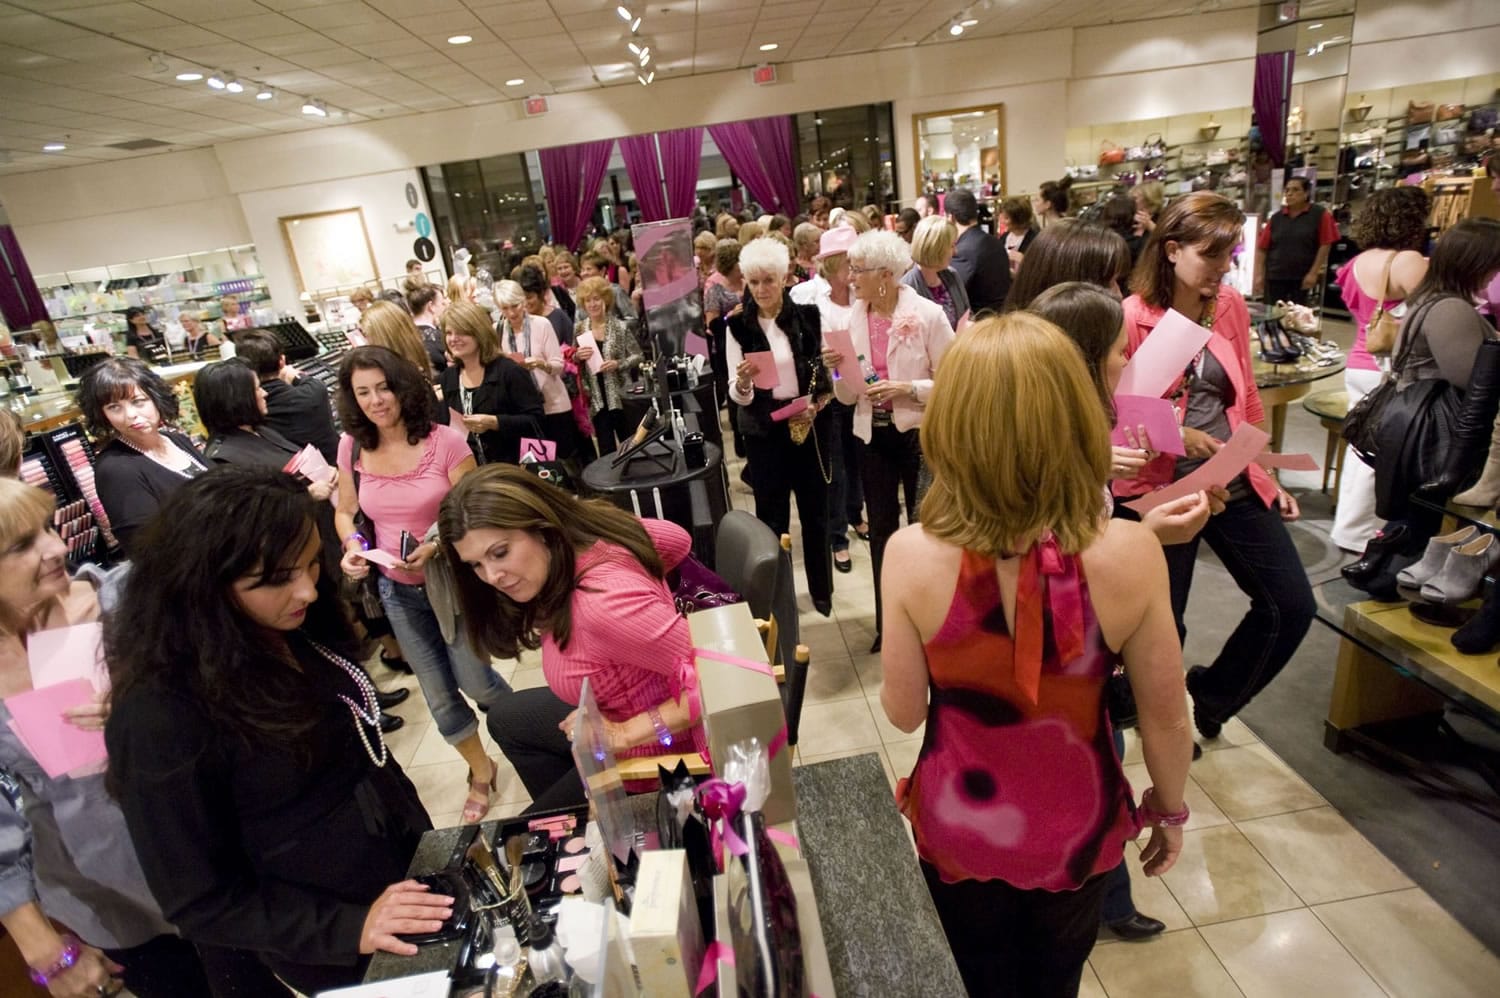 The annual Pink Power fundraiser was held this year at Westfield Vancouver mall and the Nordstrom store.